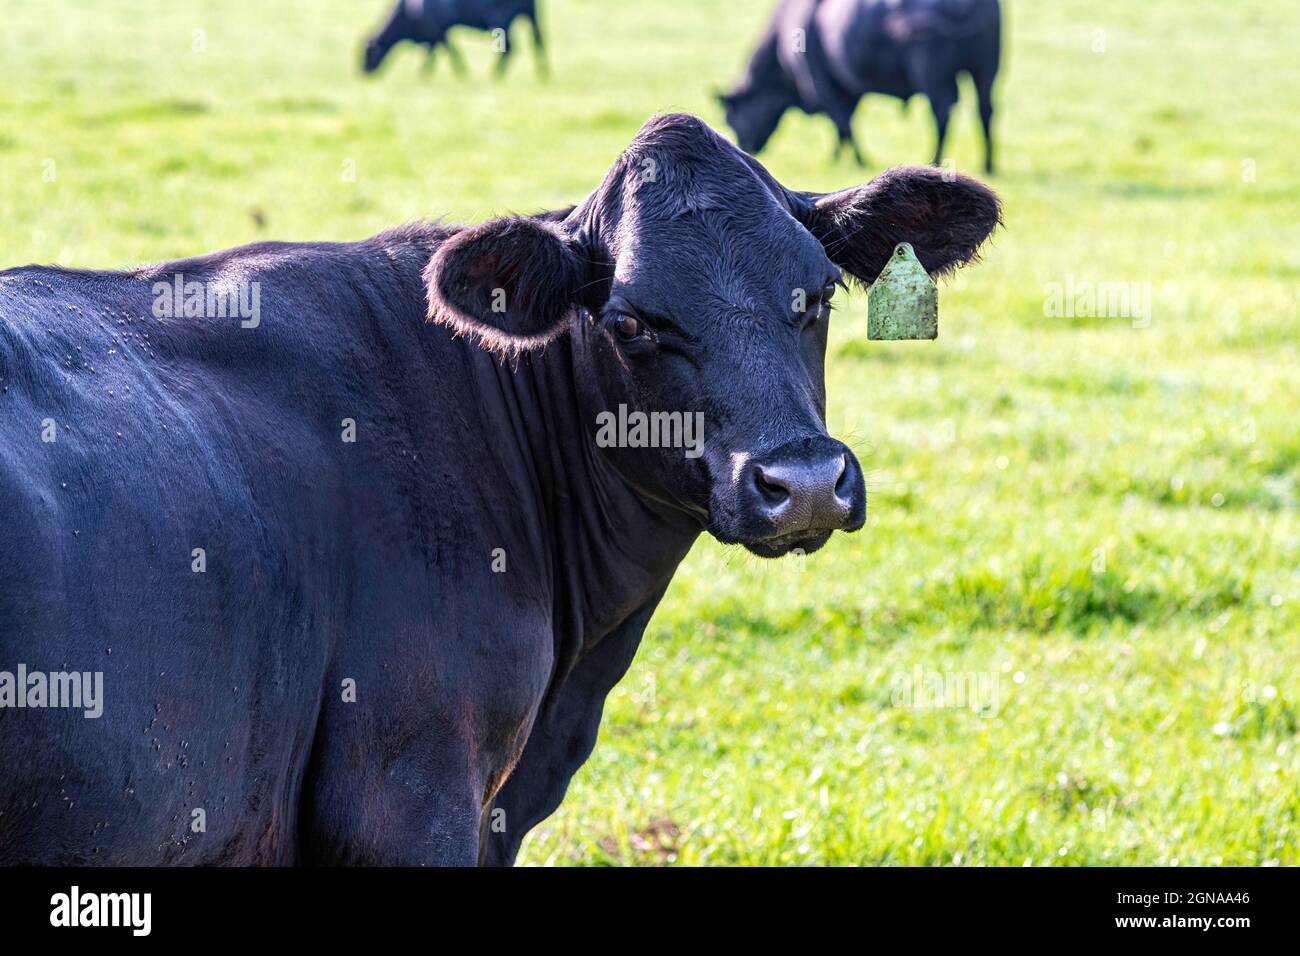 Close up of black Angus cow looking back at the camera with other cattle grazing in background. Stock Photo